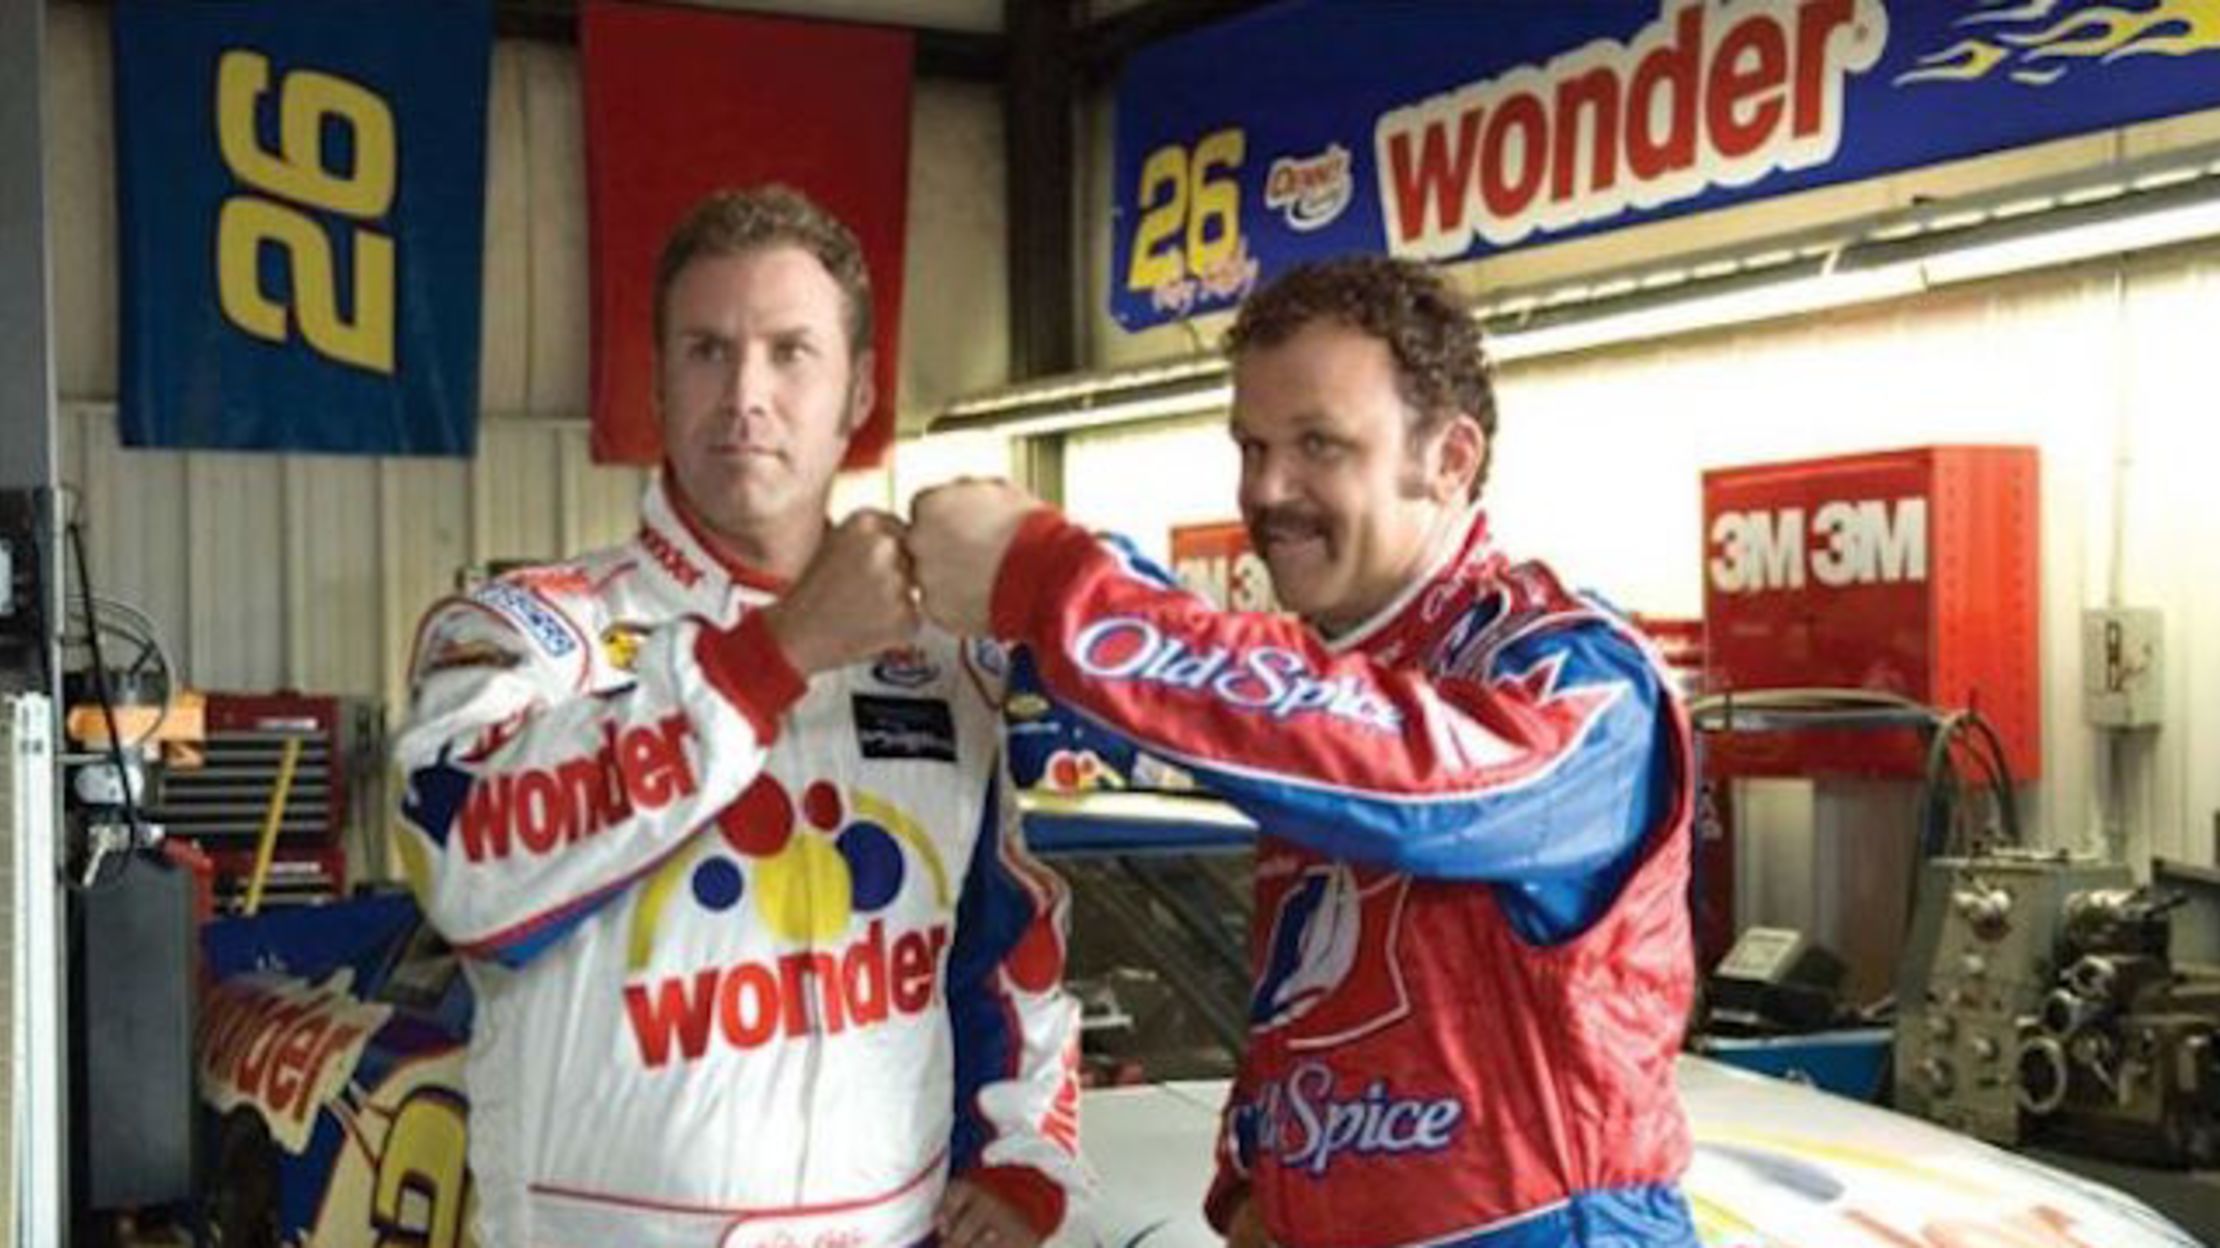 13 Fast Facts About Talladega Nights The Ballad Of Ricky Bobby Mental Floss